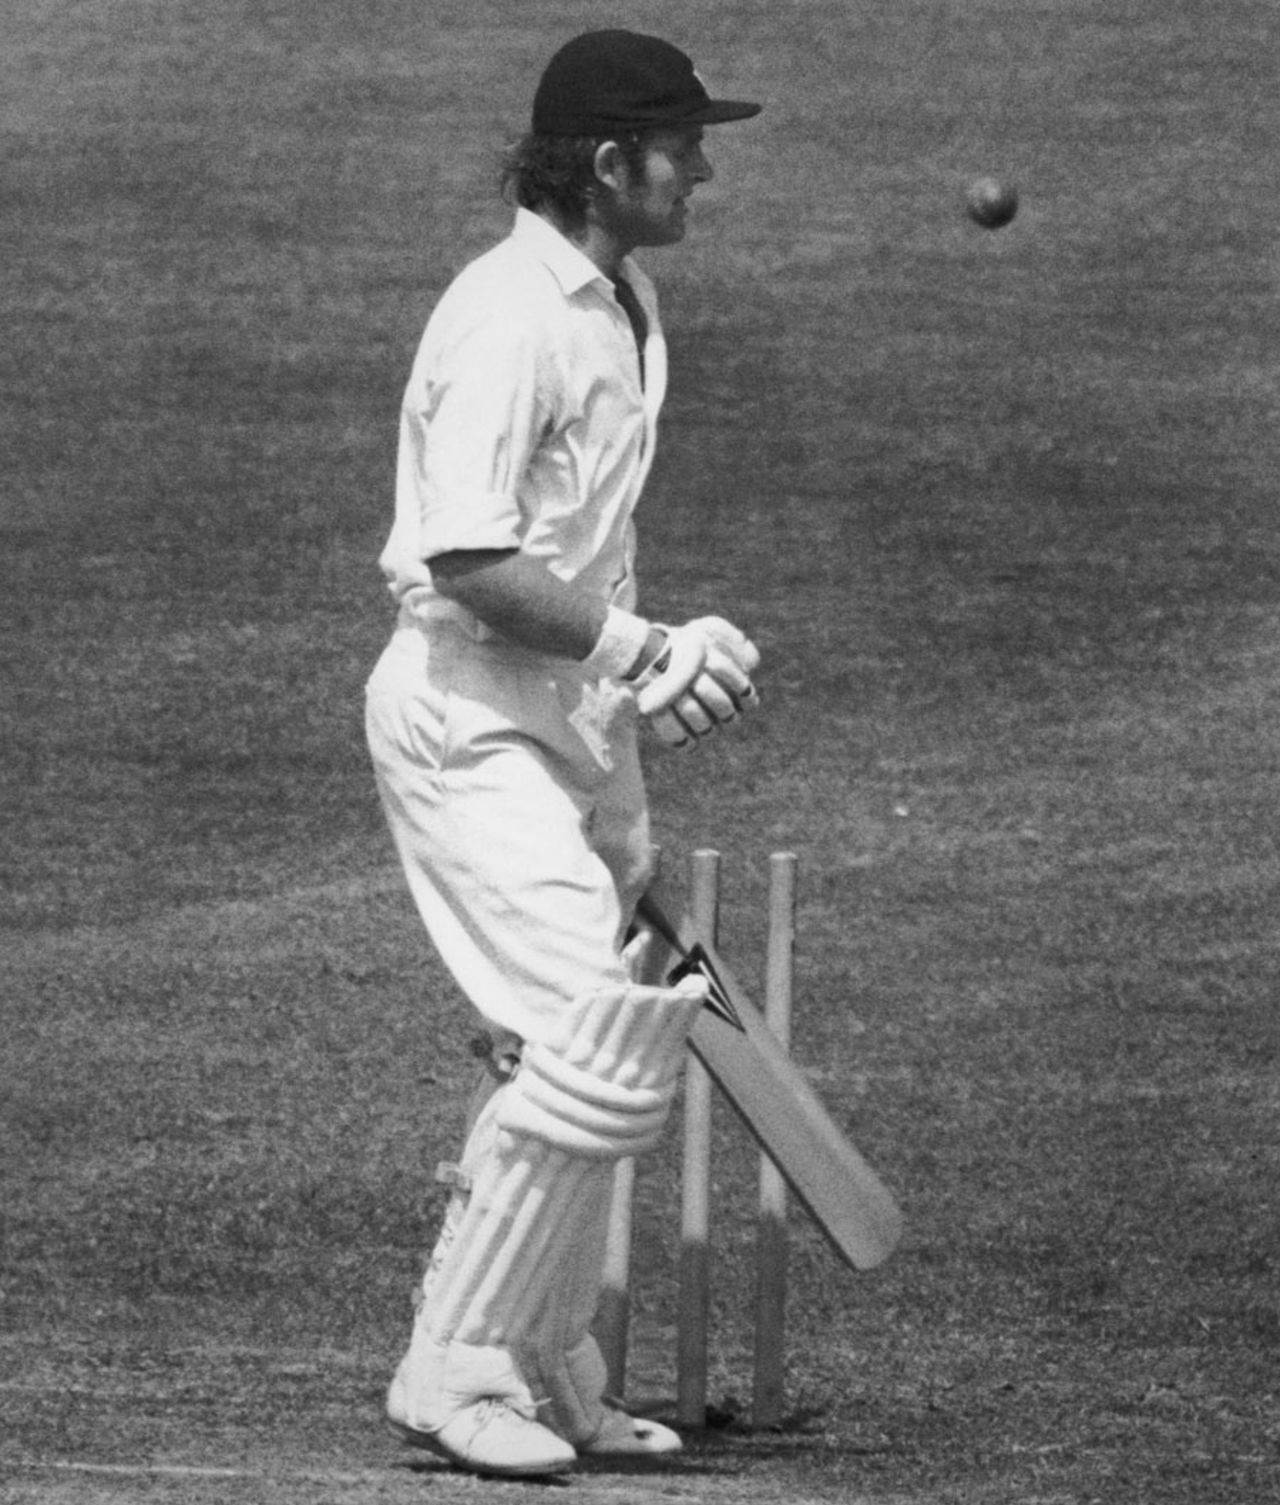 Dennis Amiss is bowled by Madan Lal for 137, England v India, World Cup, June 7, 1975